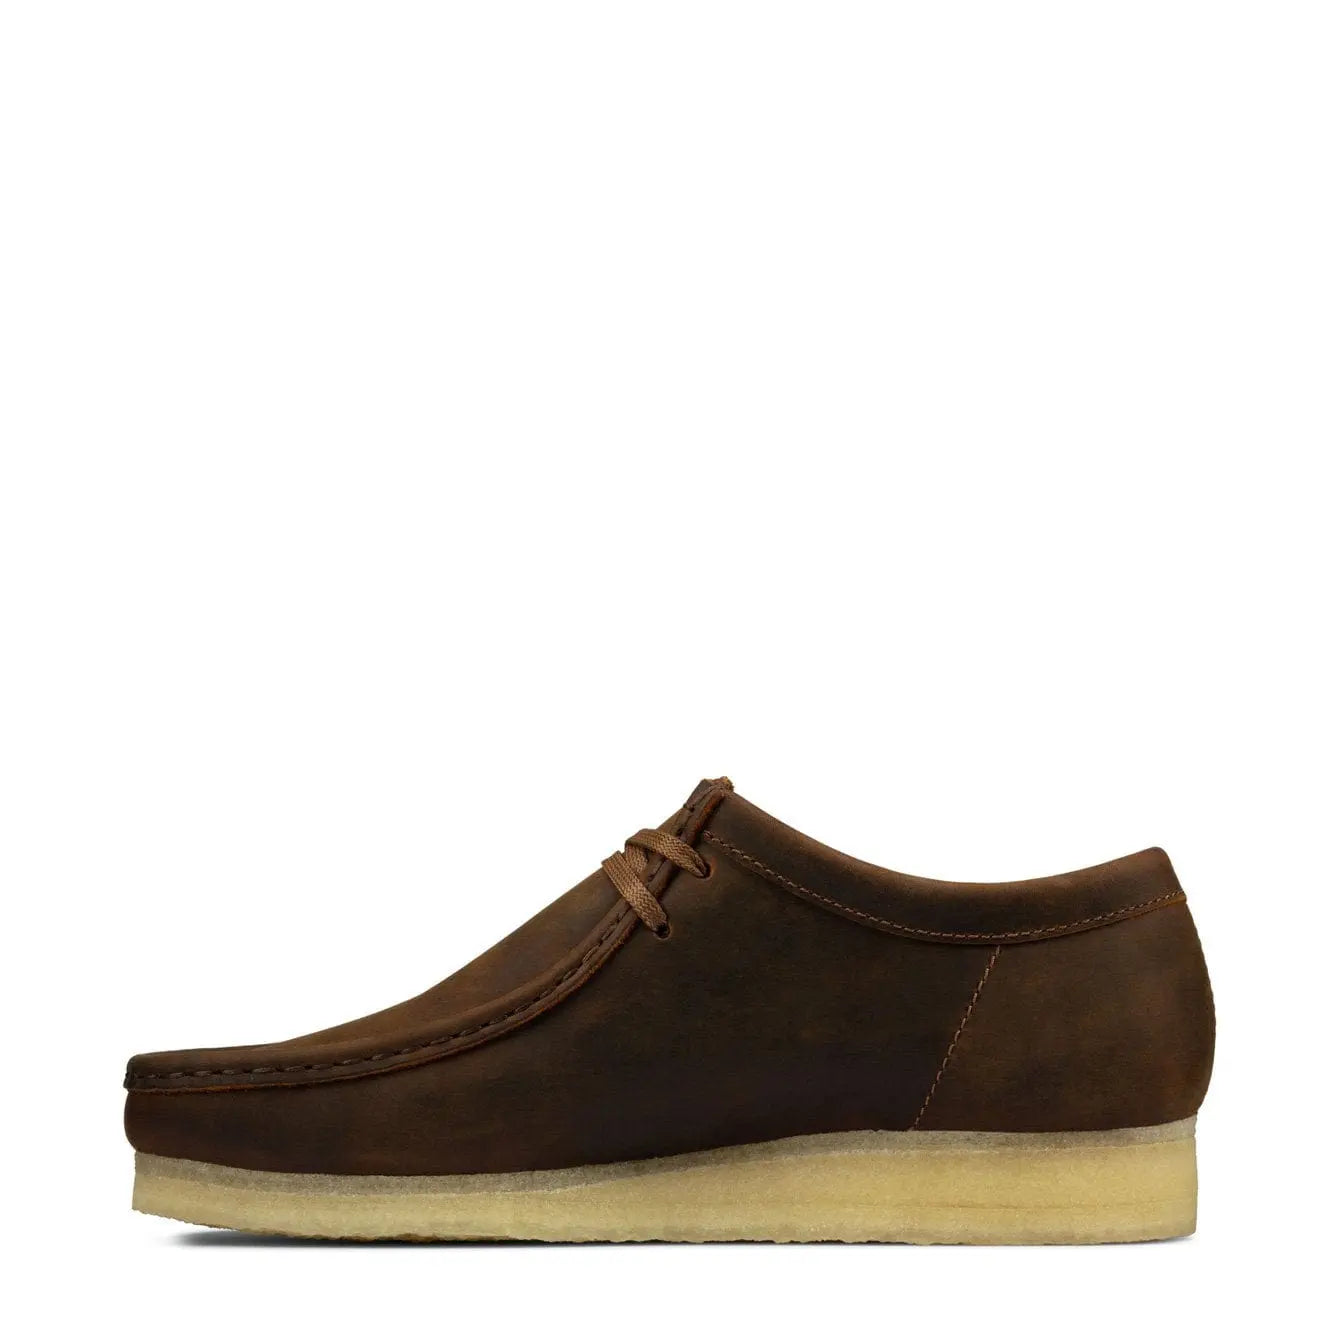 Clarks Originals Wallabee Shoes Beeswax Leather | The Sporting Lodge